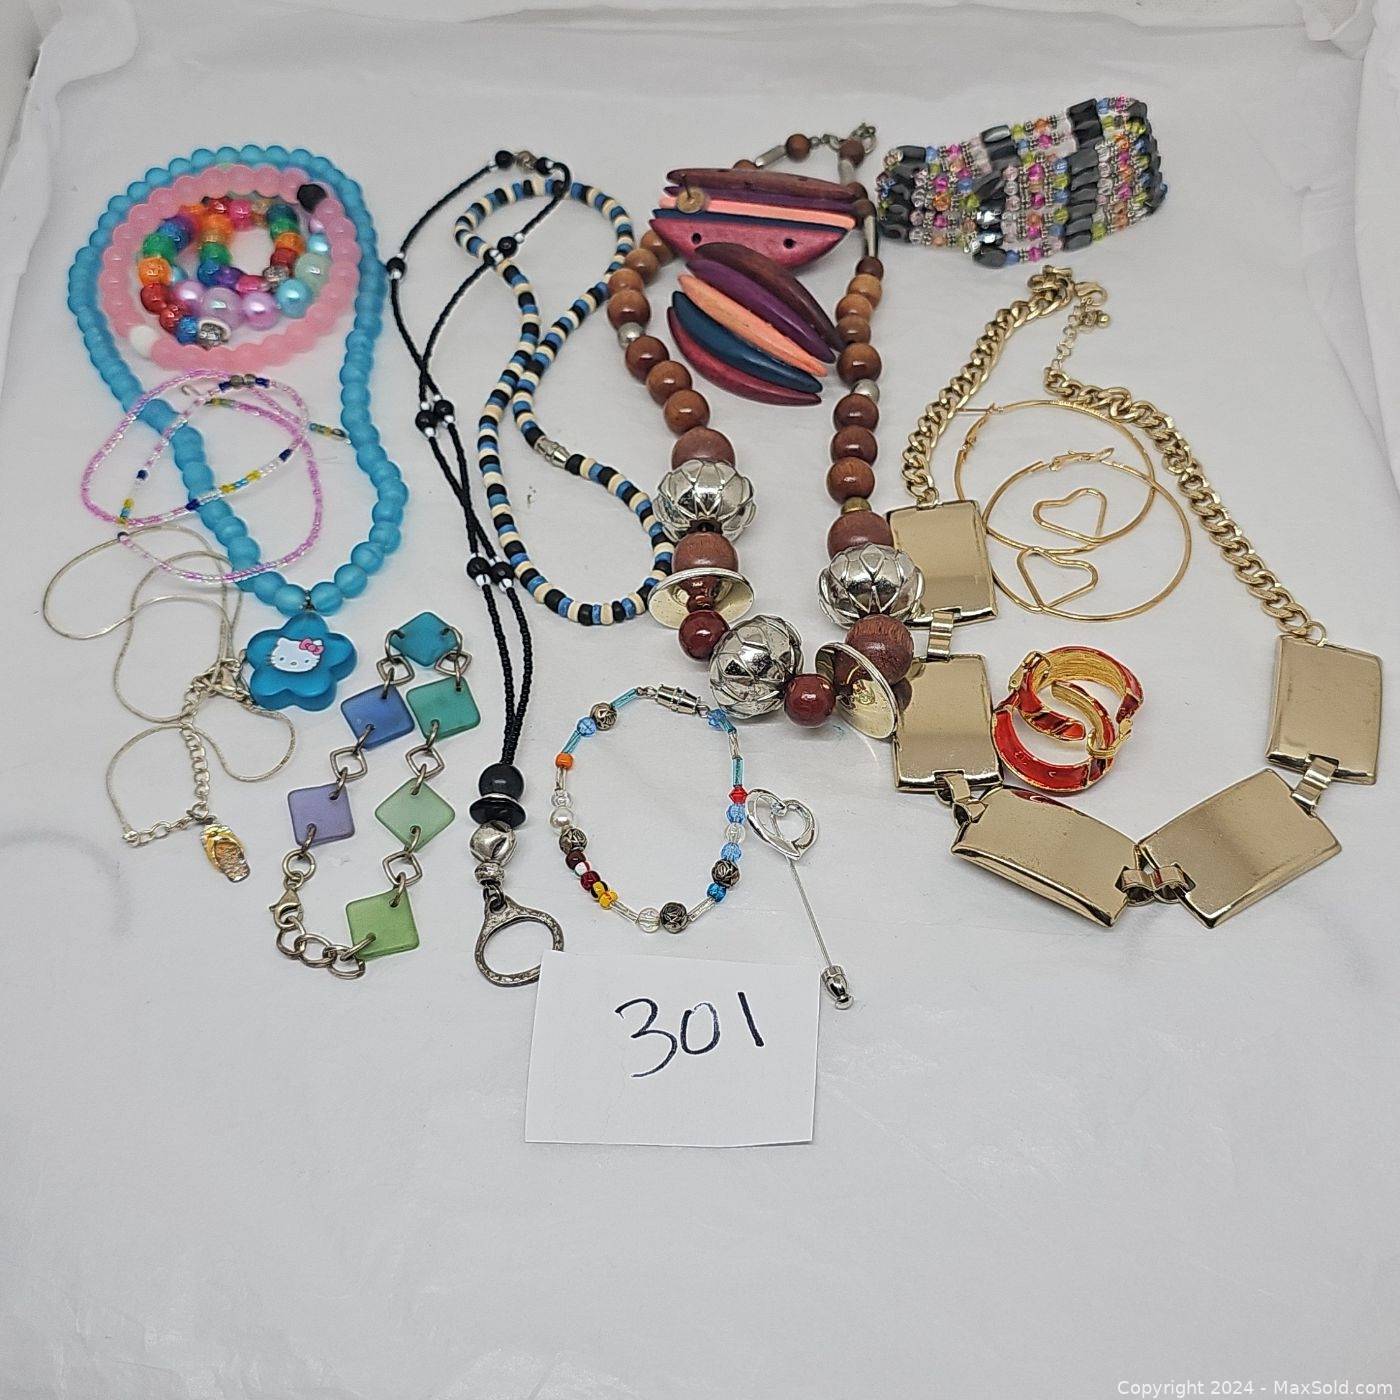 Jewelry - Mixed Lots for Sale: Online Auctions